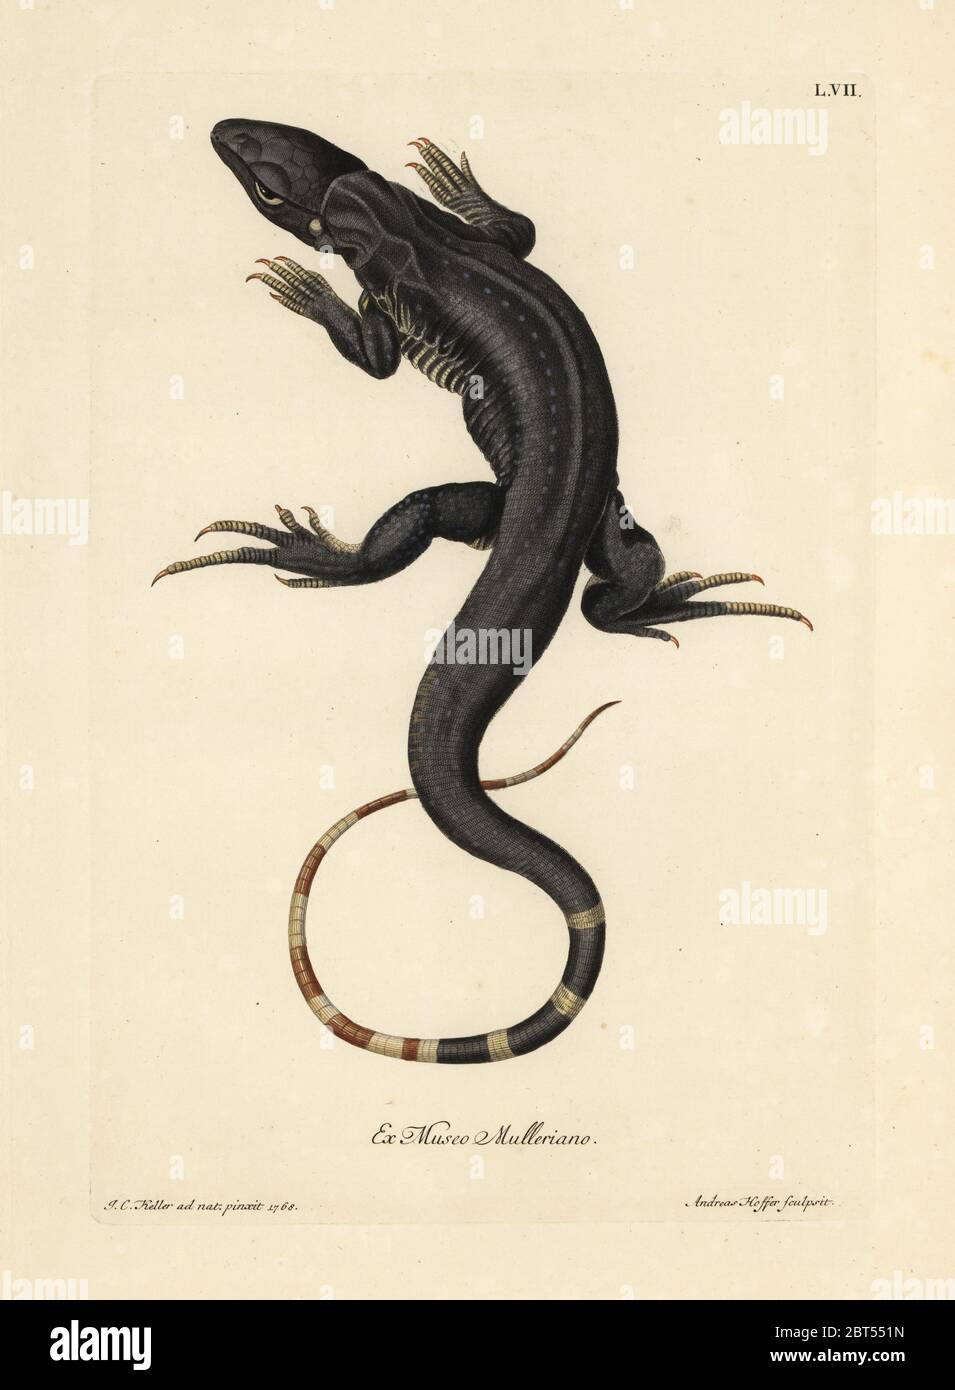 Monitor lizard, Varanus species. Handcoloured copperplate engraving by Andreas Hoffer after an illustration by Johann Christoph Keller from Georg Wolfgang Knorr's Deliciae Naturae Selectae of Kabinet van Zeldzaamheden der Natuur, Blusse and Son, Nuremberg, 1771. Specimens from a Wunderkammer or Cabinet of Curiosities owned by P.L. Muller. Stock Photo